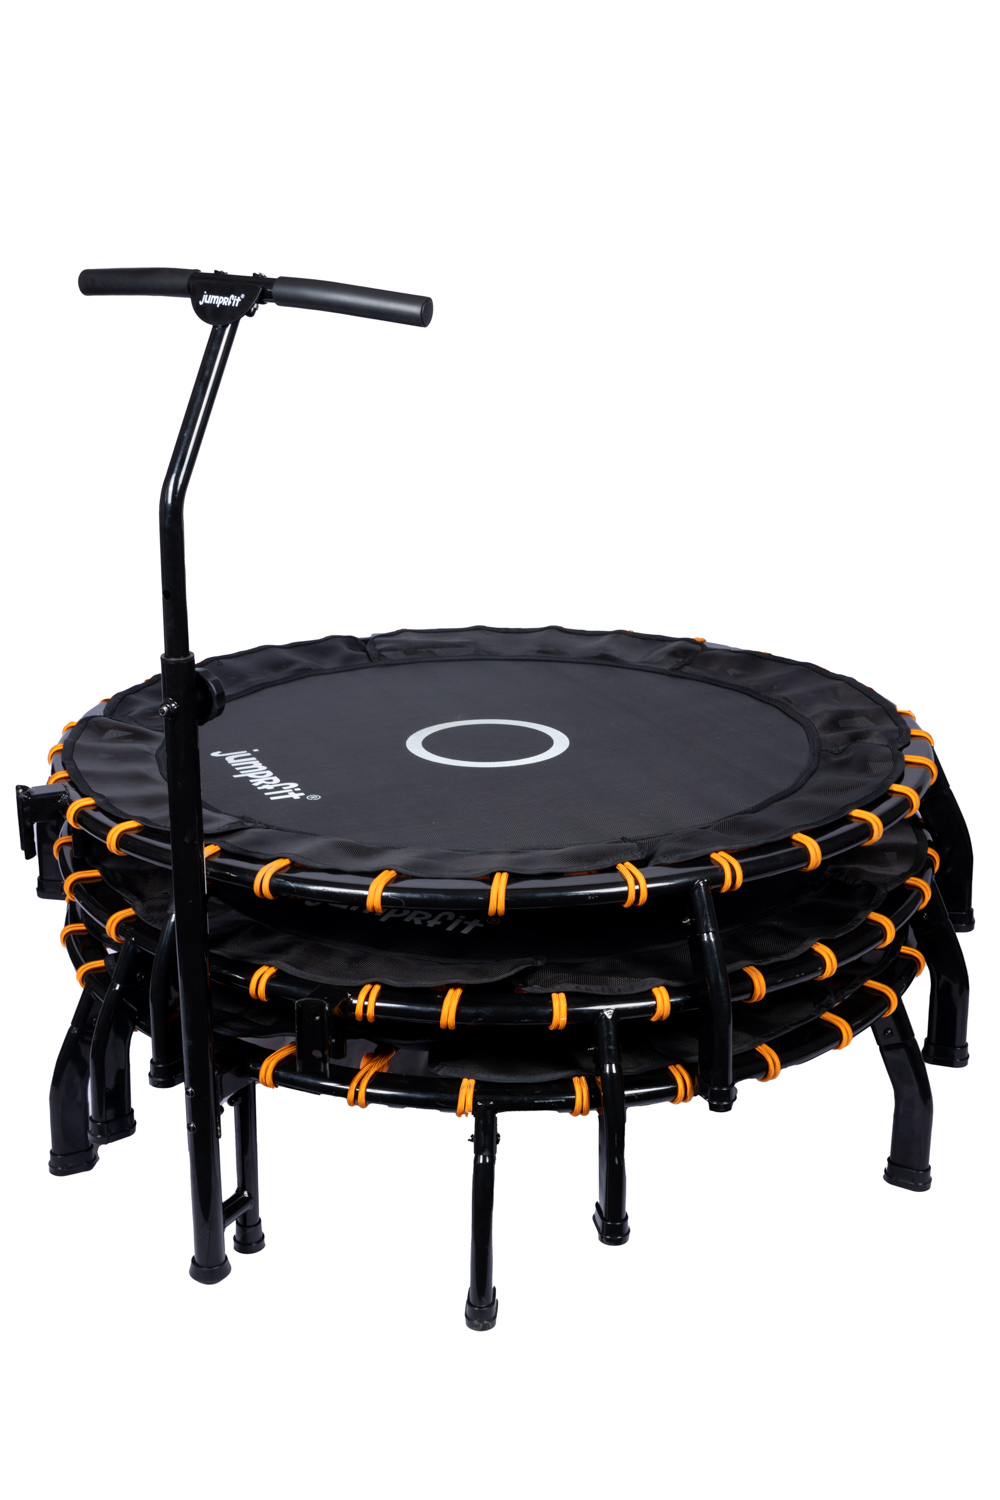 Fitness Trampoline 45" with Handle